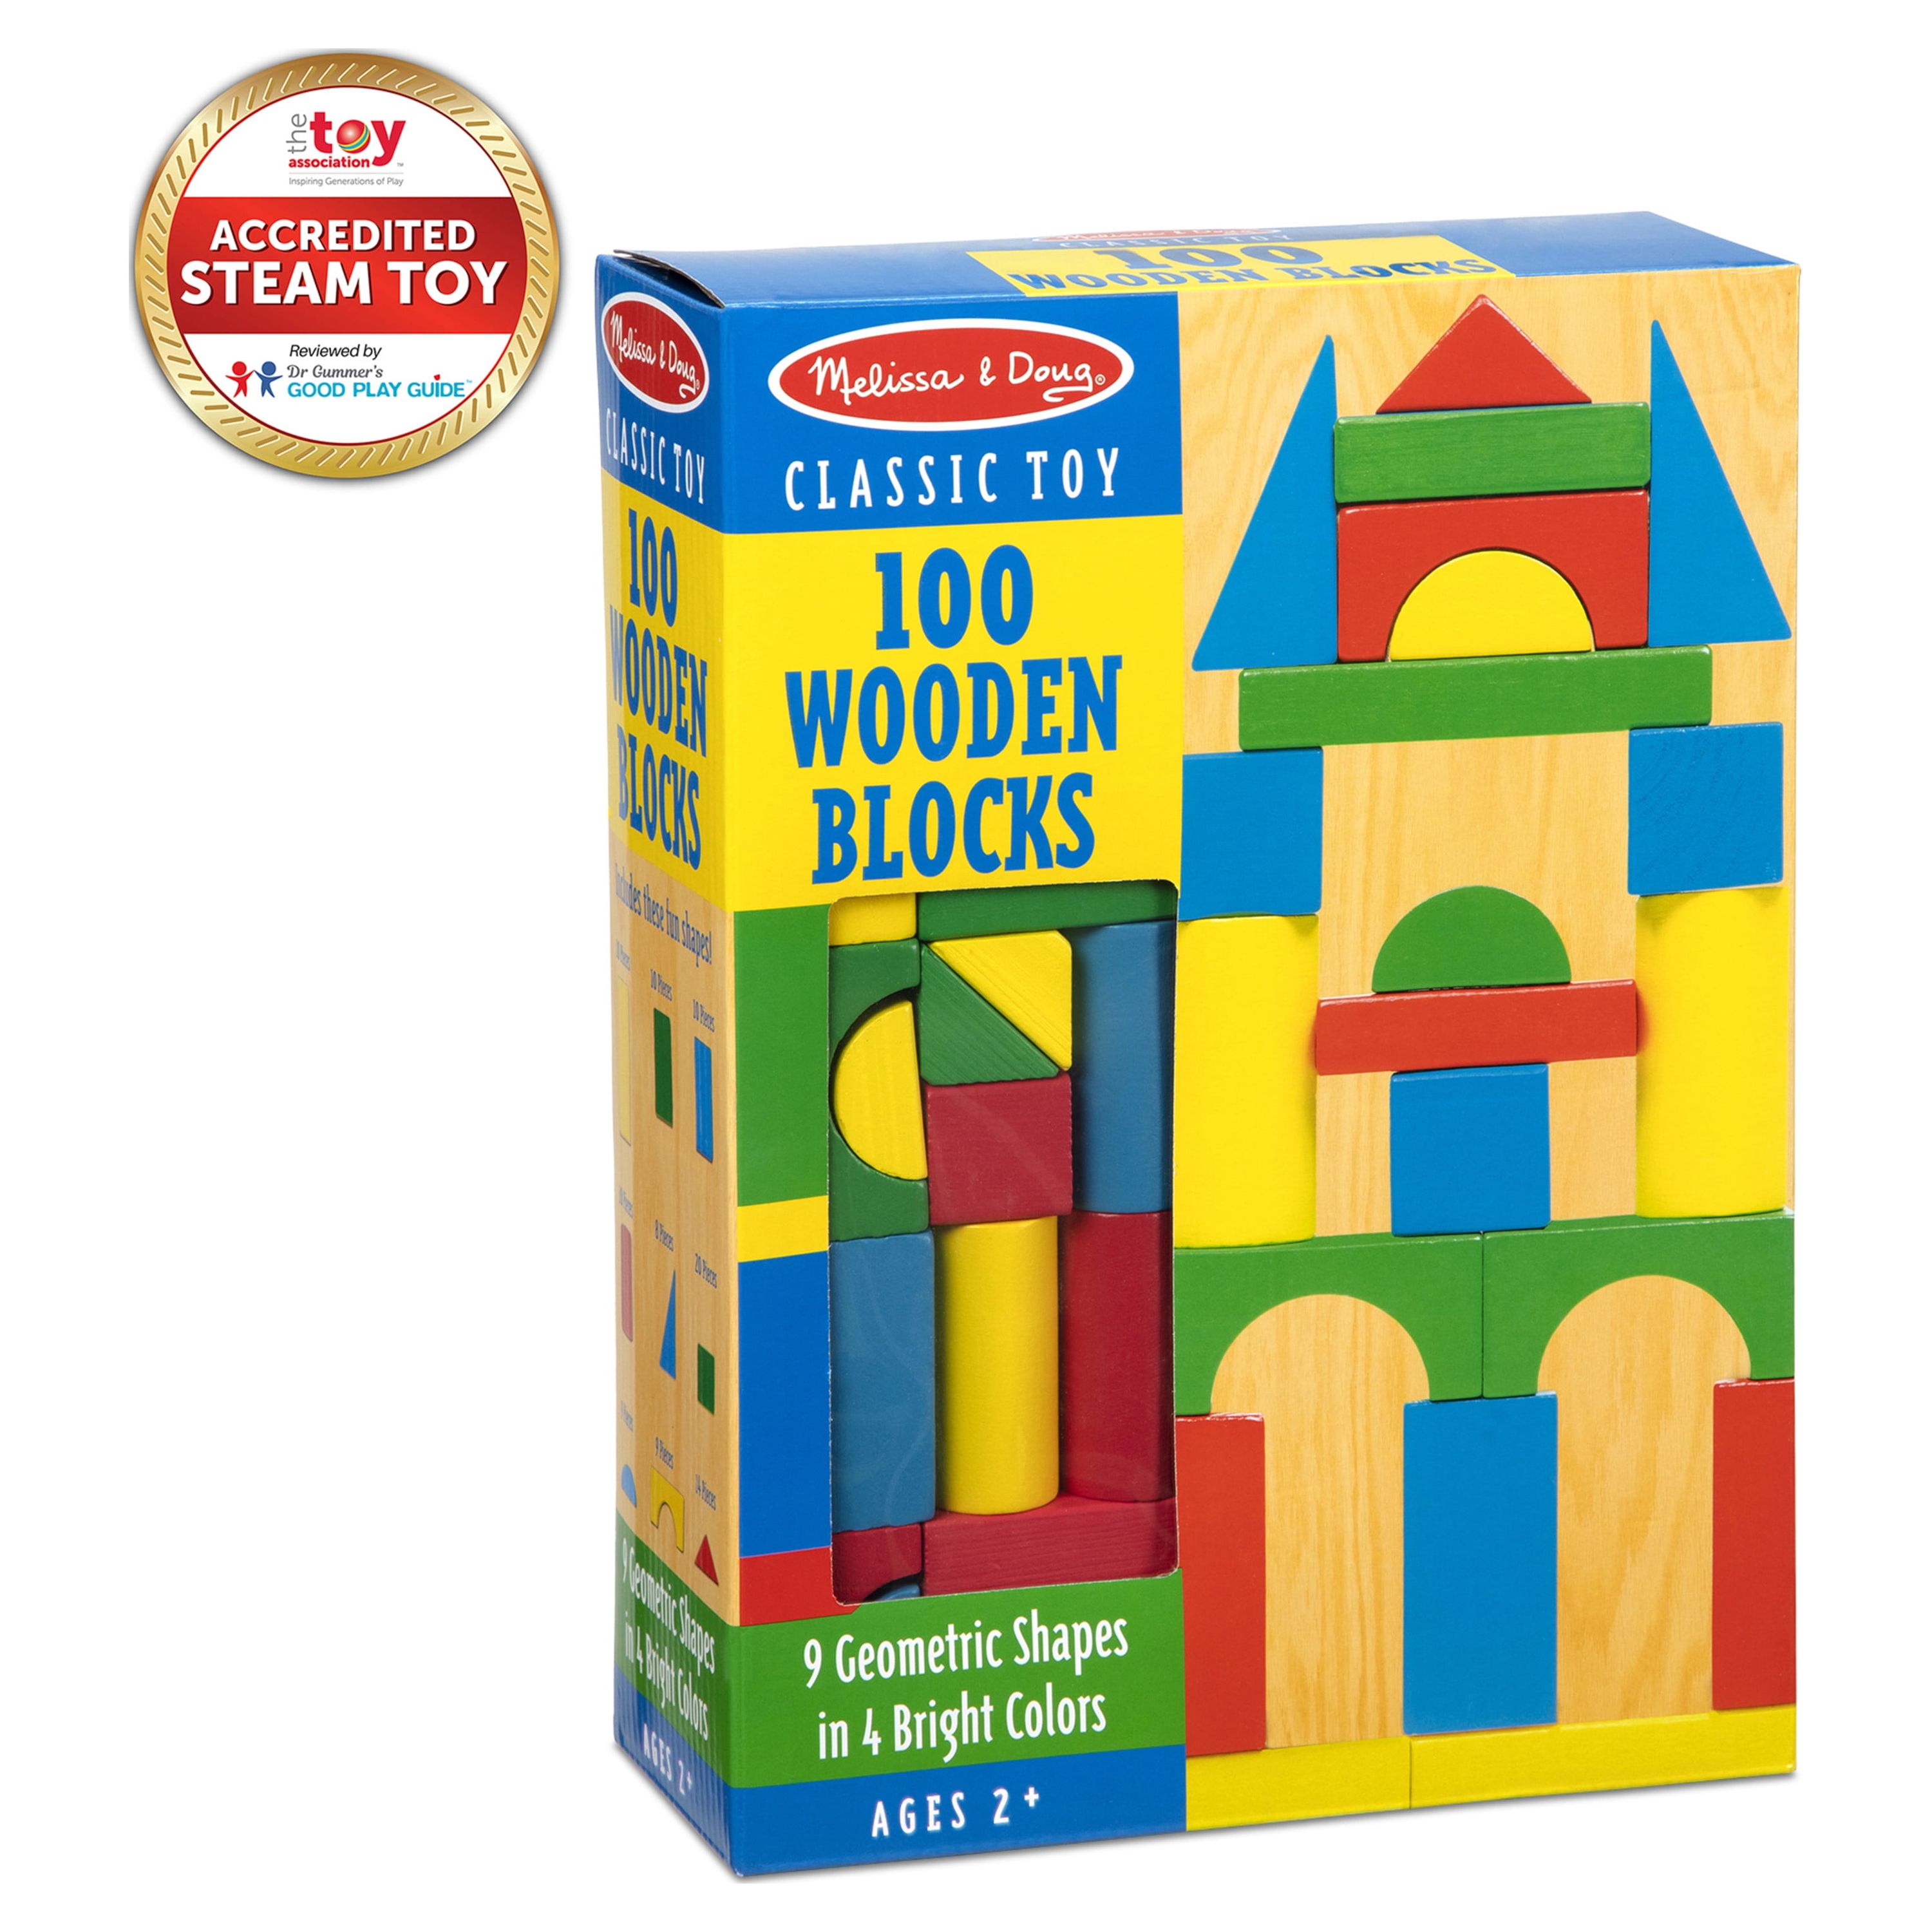 Melissa & Doug Wooden Building Blocks Set - 100 Blocks in 4 Colors and 9 Shapes - FSC Certified - image 5 of 11